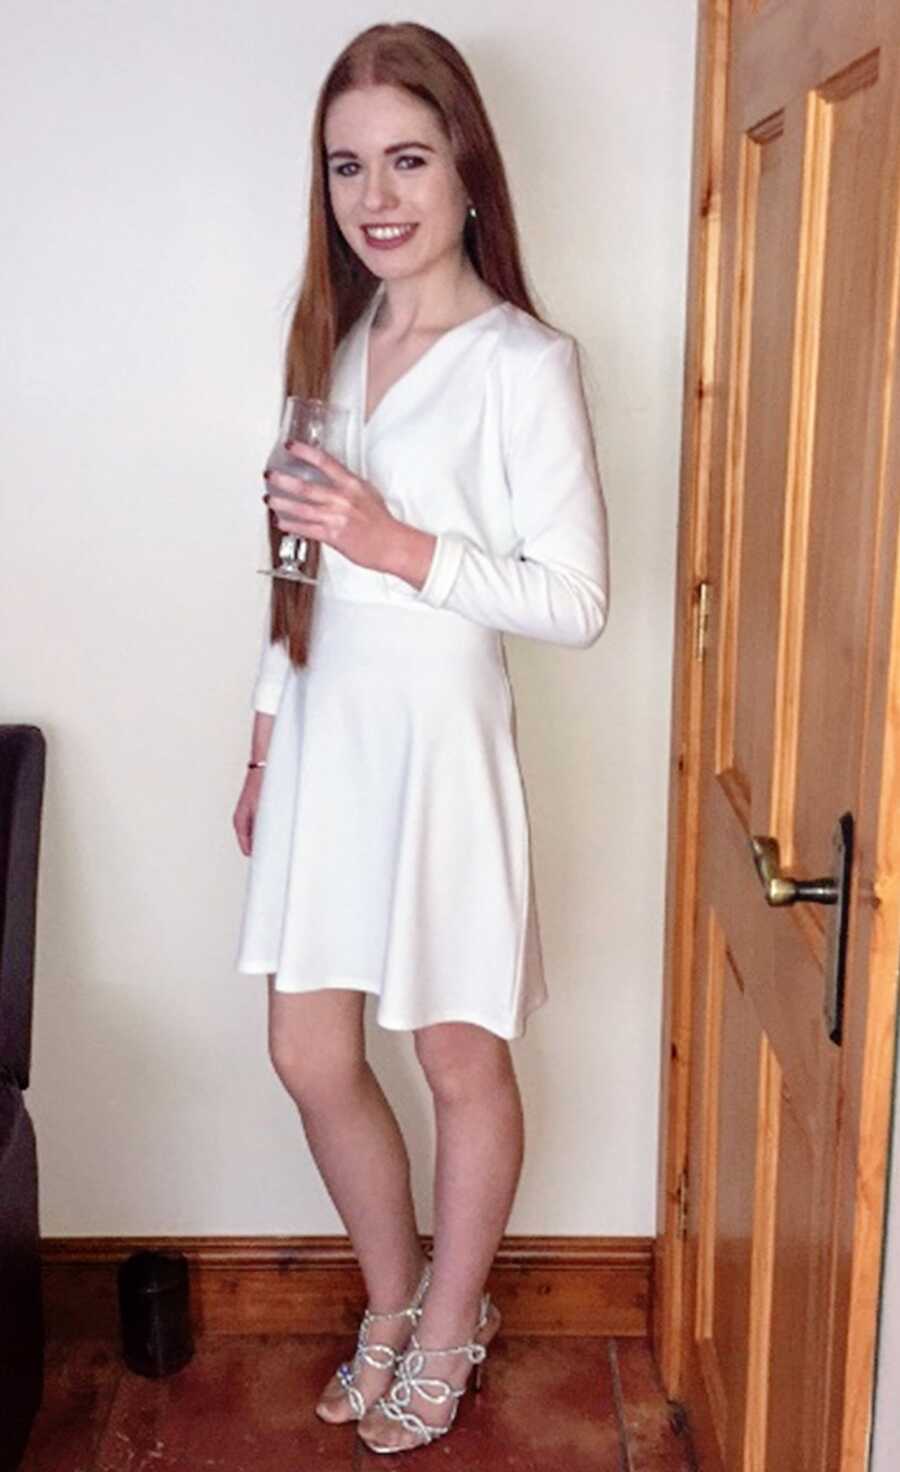 Young college student poses for a photo in a white dress while holding a glass of champagne